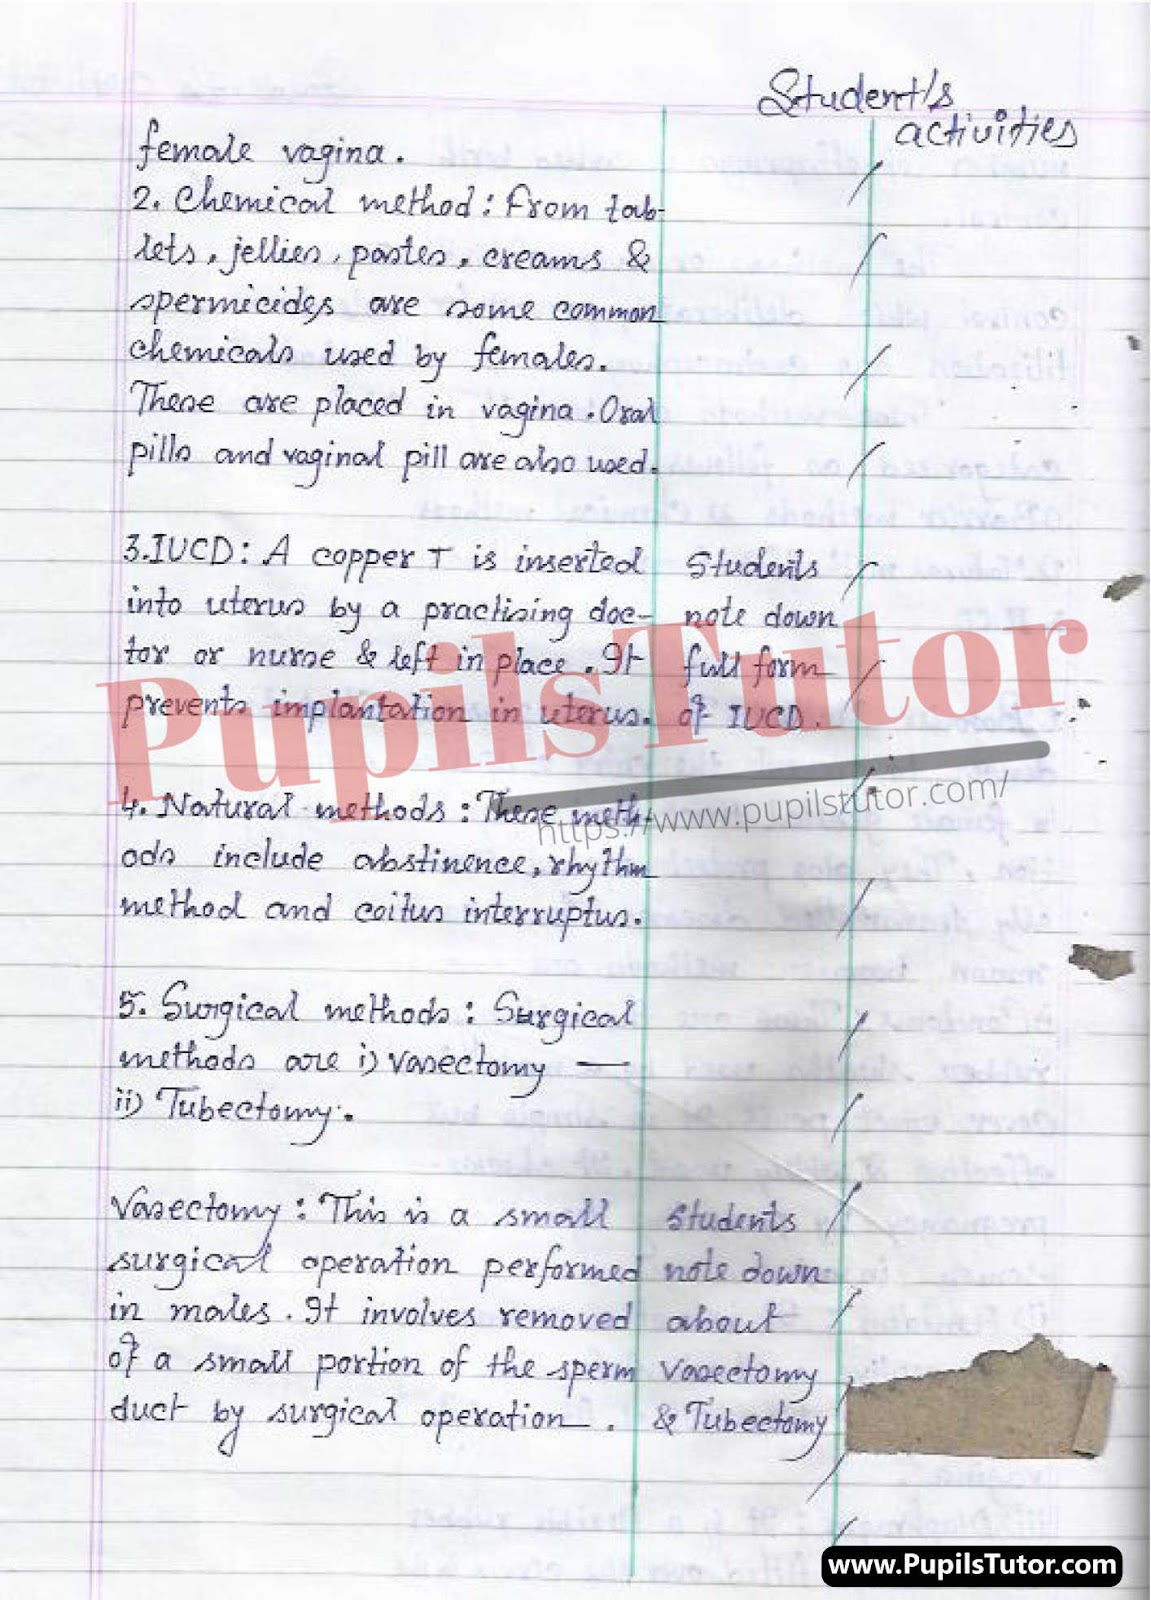 BED, DELED, BTC, BSTC, M.ED, DED And NIOS Teaching Of Social Science, General Science And Biological Science Innovative Digital Lesson Plan Format On Population Control Topic For Class 4th 5th 6th 7th 8th 9th, 10th, 11th, 12th  – [Page And Photo 4] – pupilstutor.com